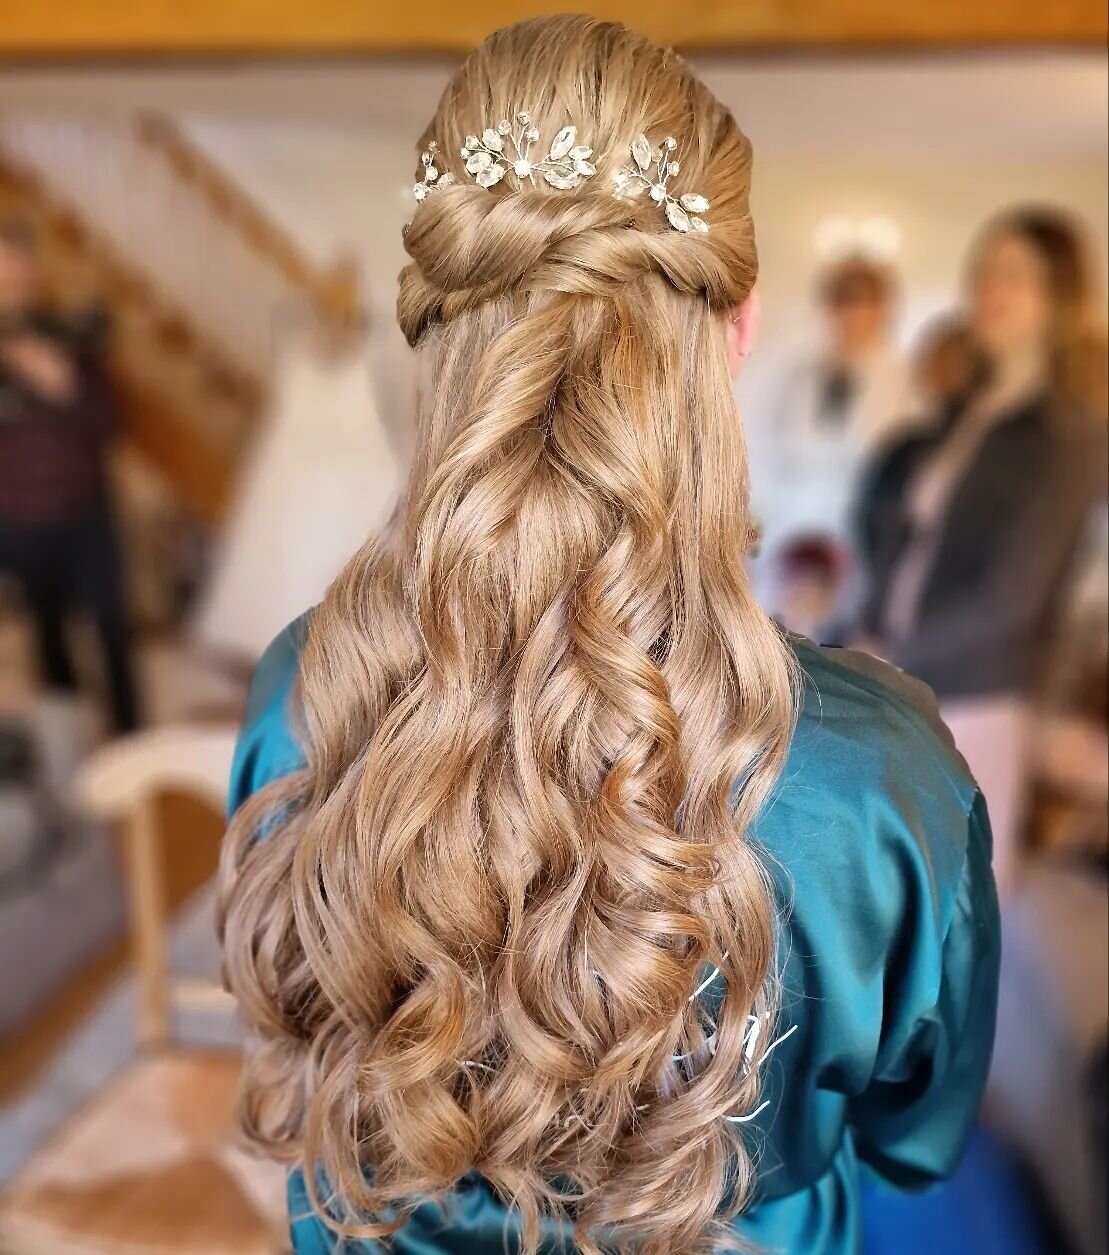 Maid of Honour ✨️ Long, heavy, non coloured hair can be the hardest to hold a curl! For this Style I did a curl and set first thing in the morning (curled, sprayed &amp; pinned up each individual curl) and then styled last just before the ceremony. L